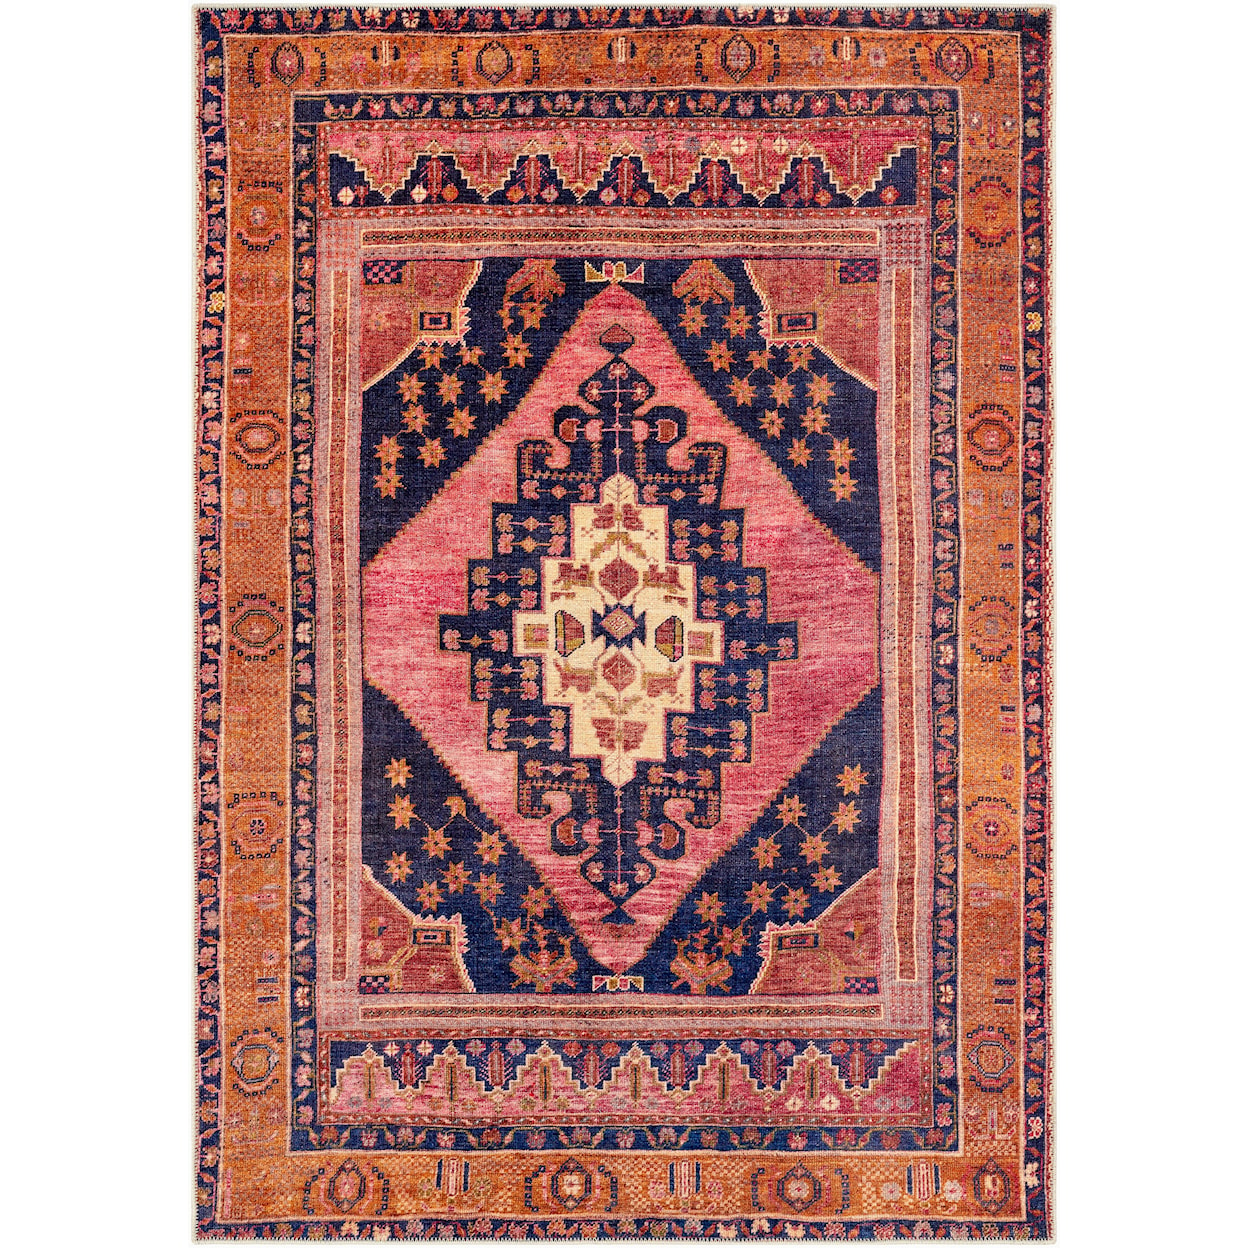 Ruby-Gordon Accents Amelie Rugs